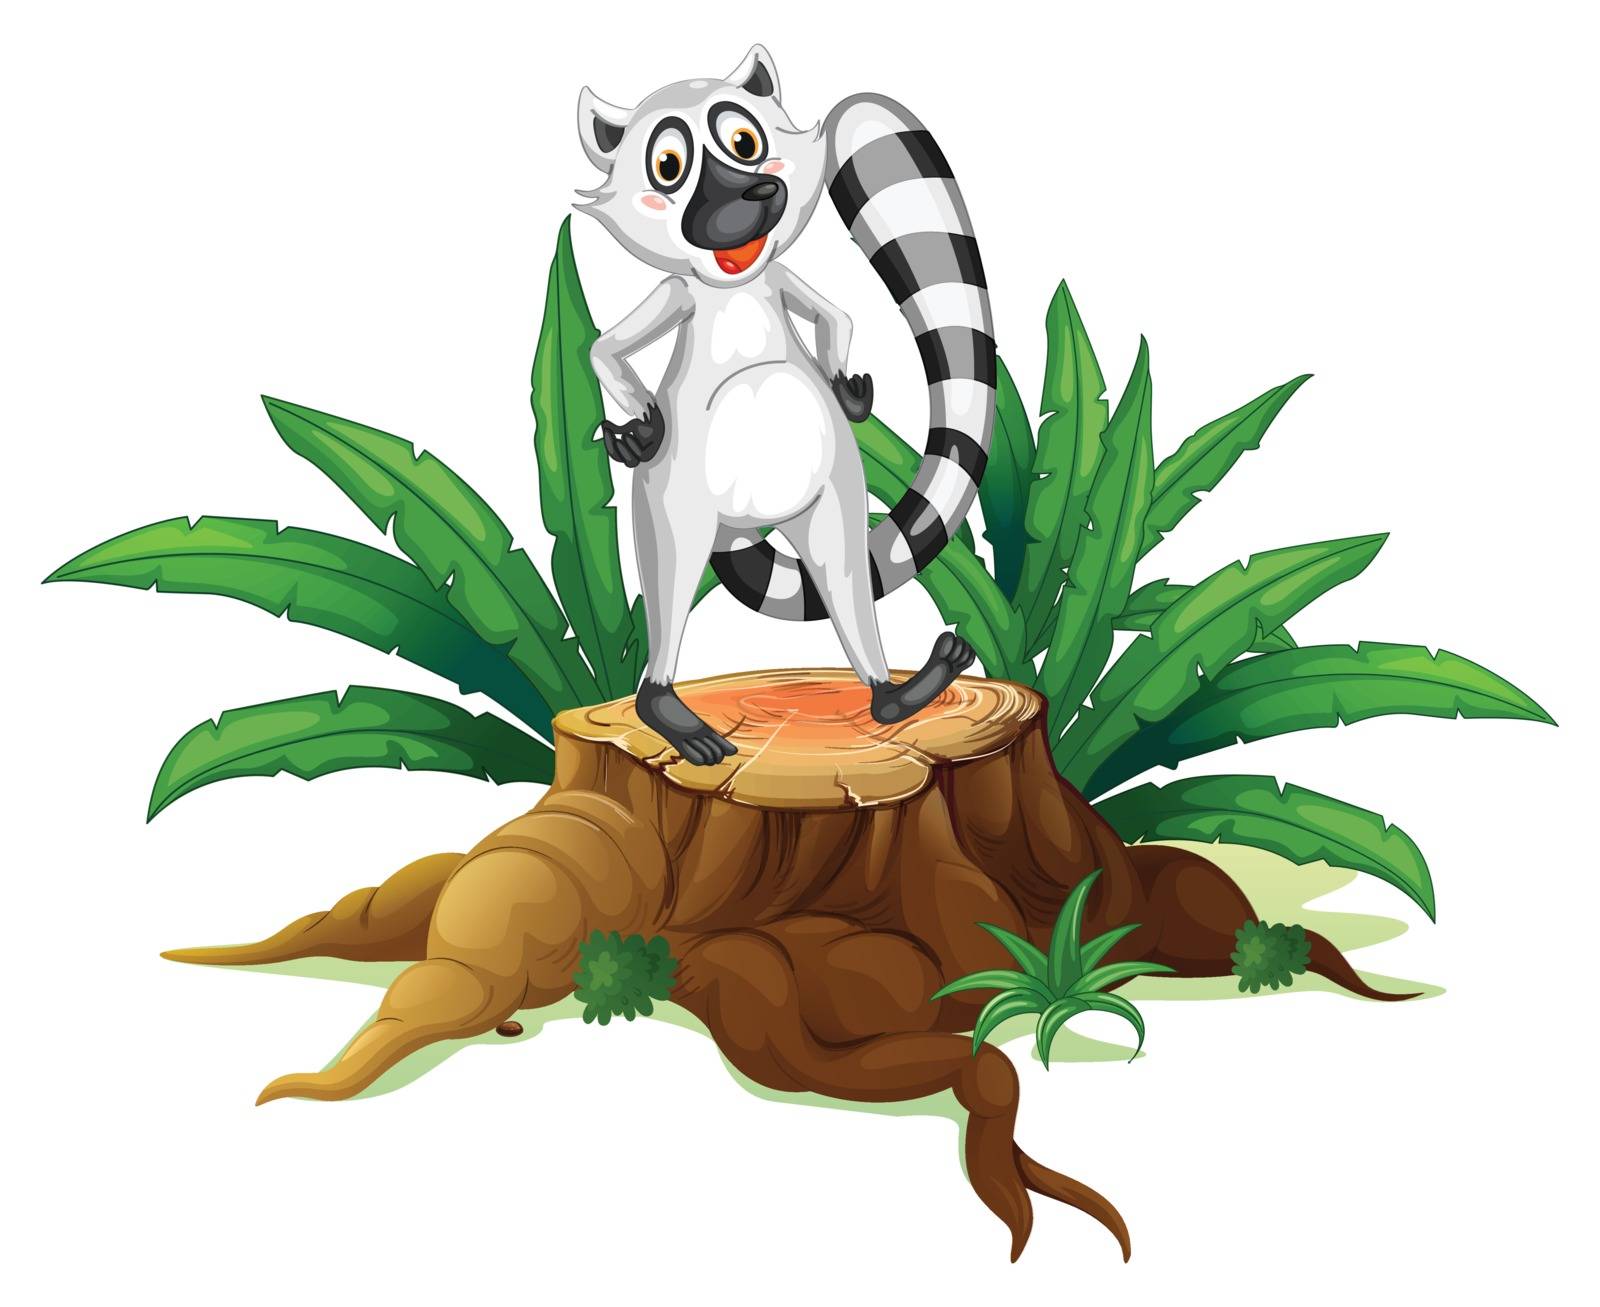 Illustration of a trunk with a lemur on a white background